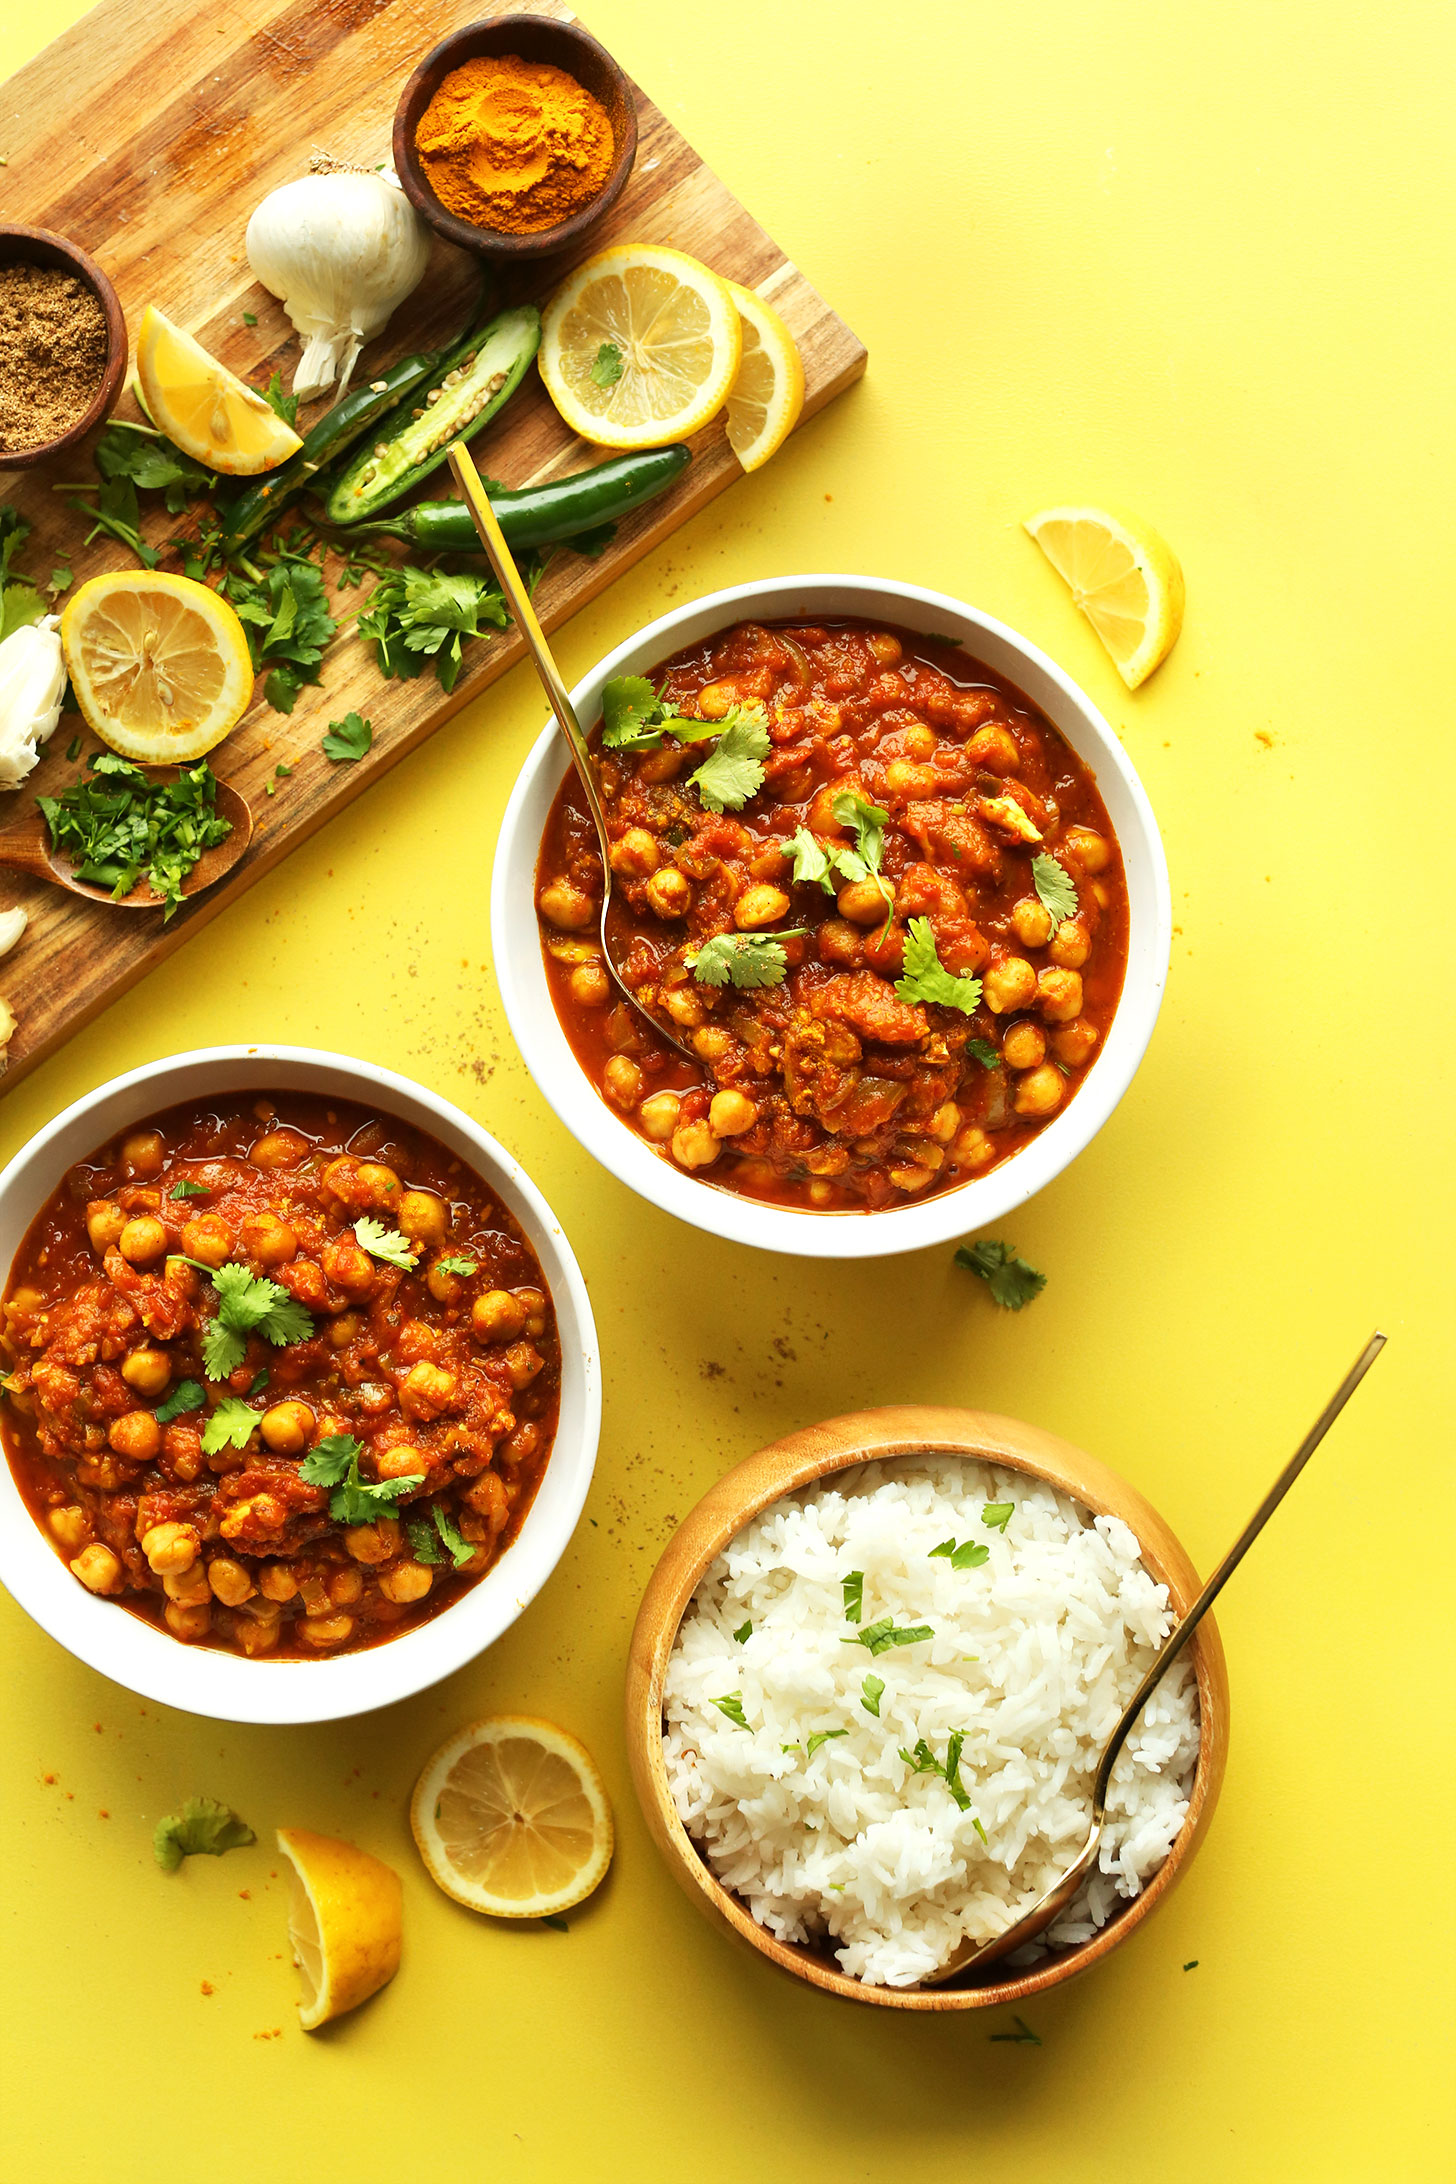 Bowls of our homemade gluten-free vegan Chana Masala with a bowl of rice